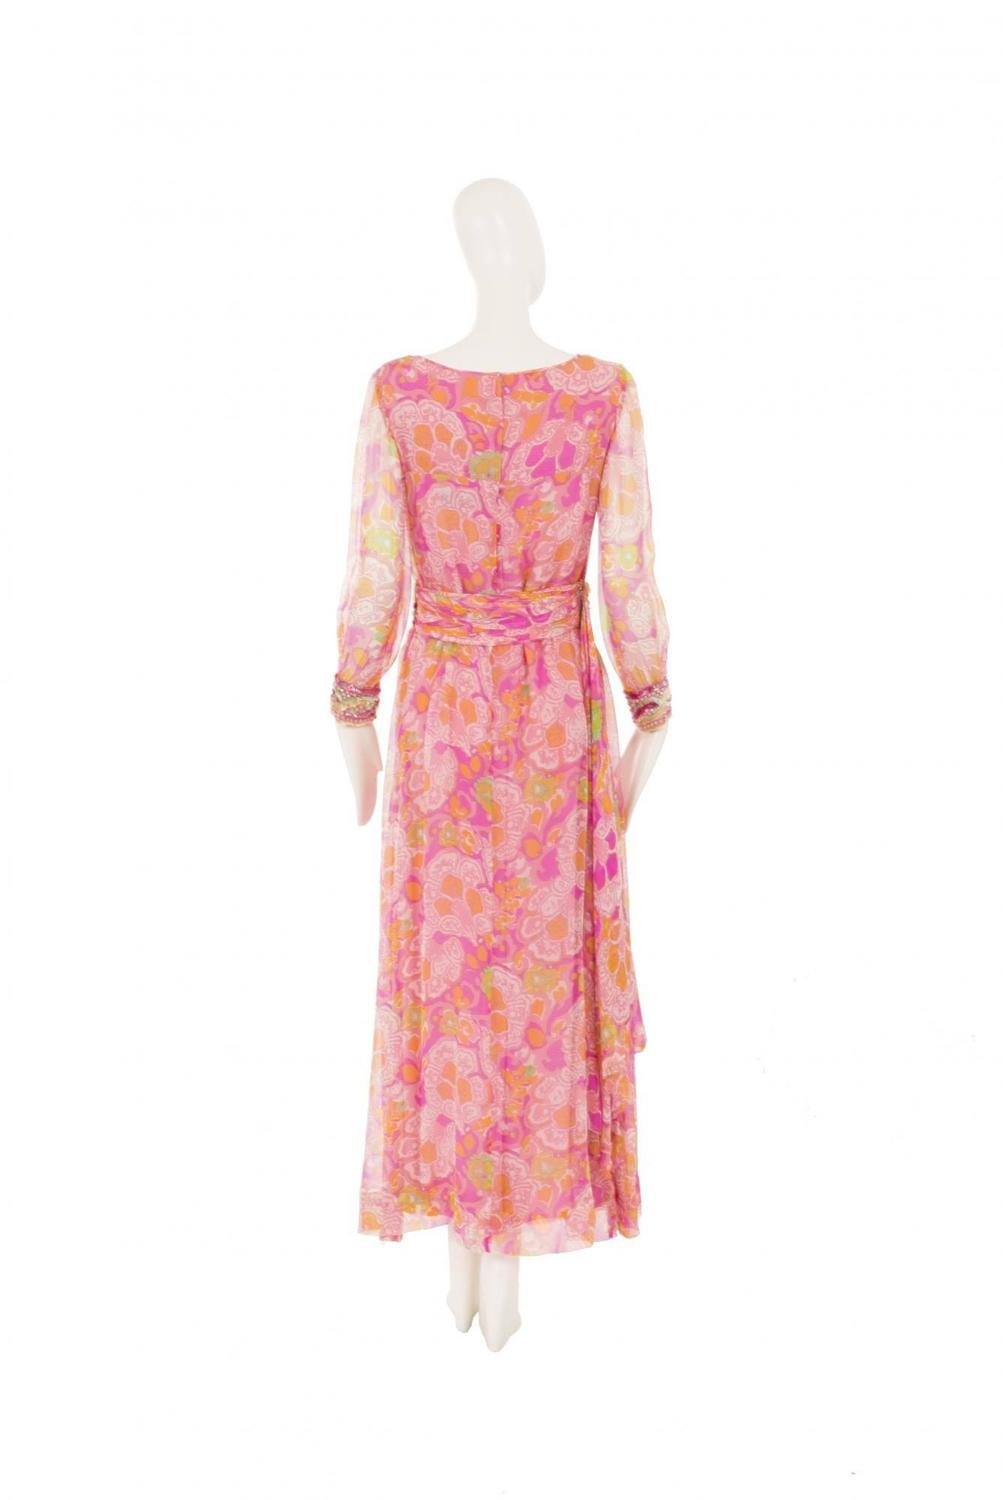 Hardy Amies couture pink dress, circa 1969 For Sale at 1stdibs